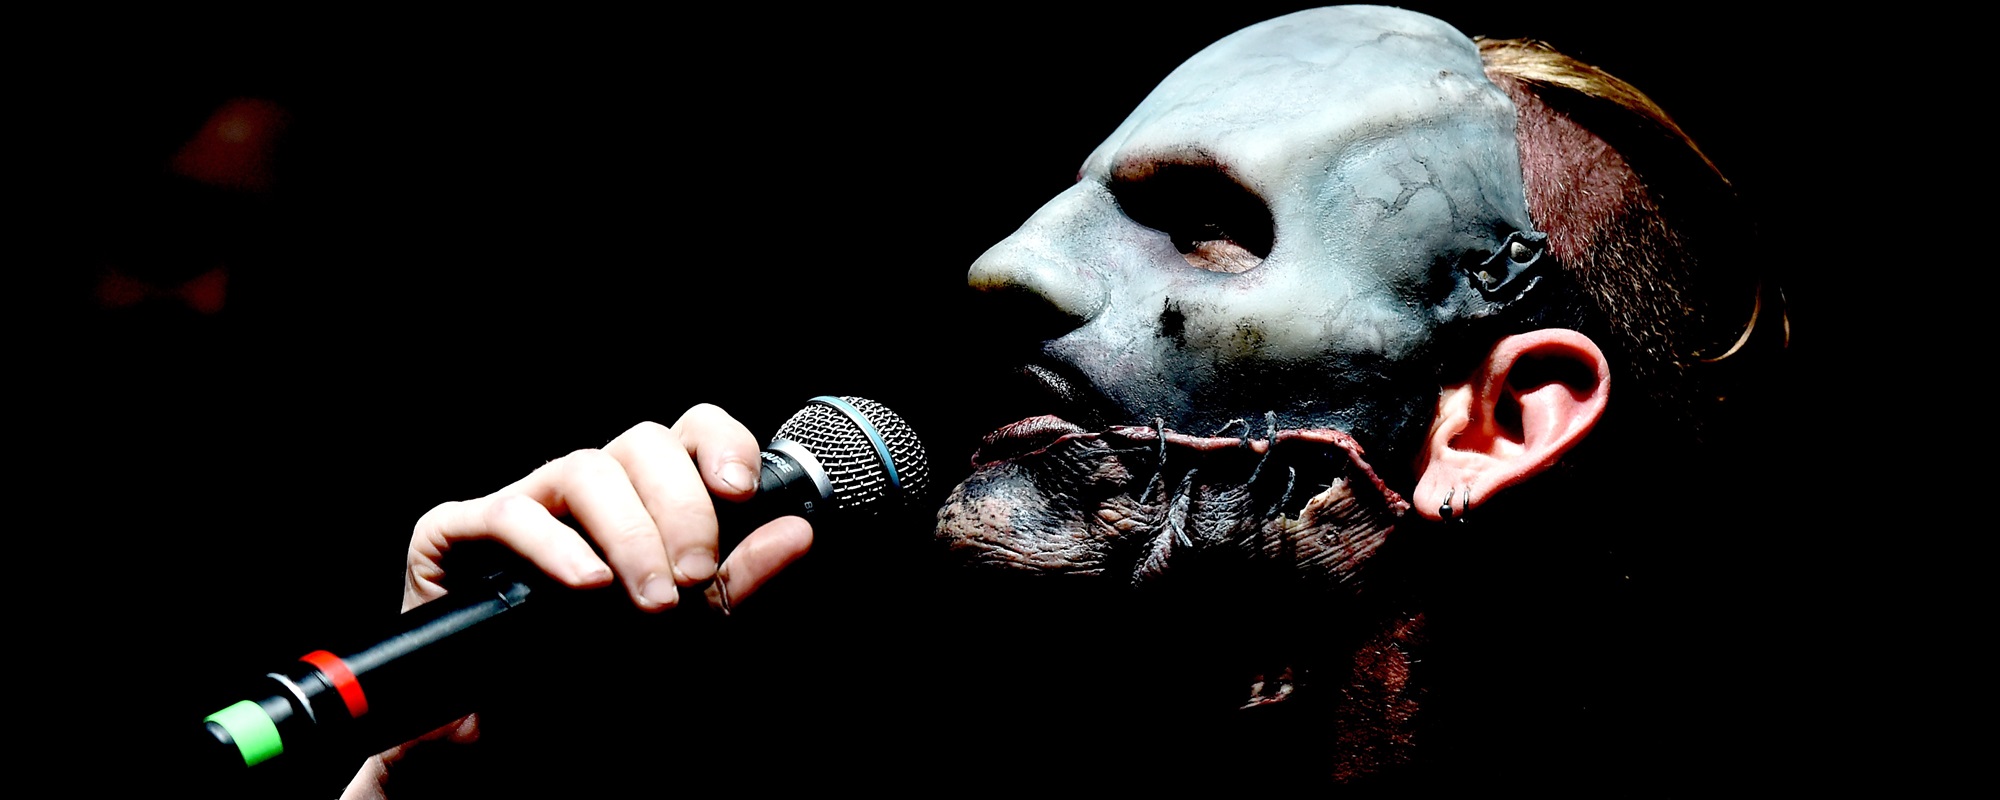 Slipknot Extends 25th Anniversary Tour: How To Get Tickets